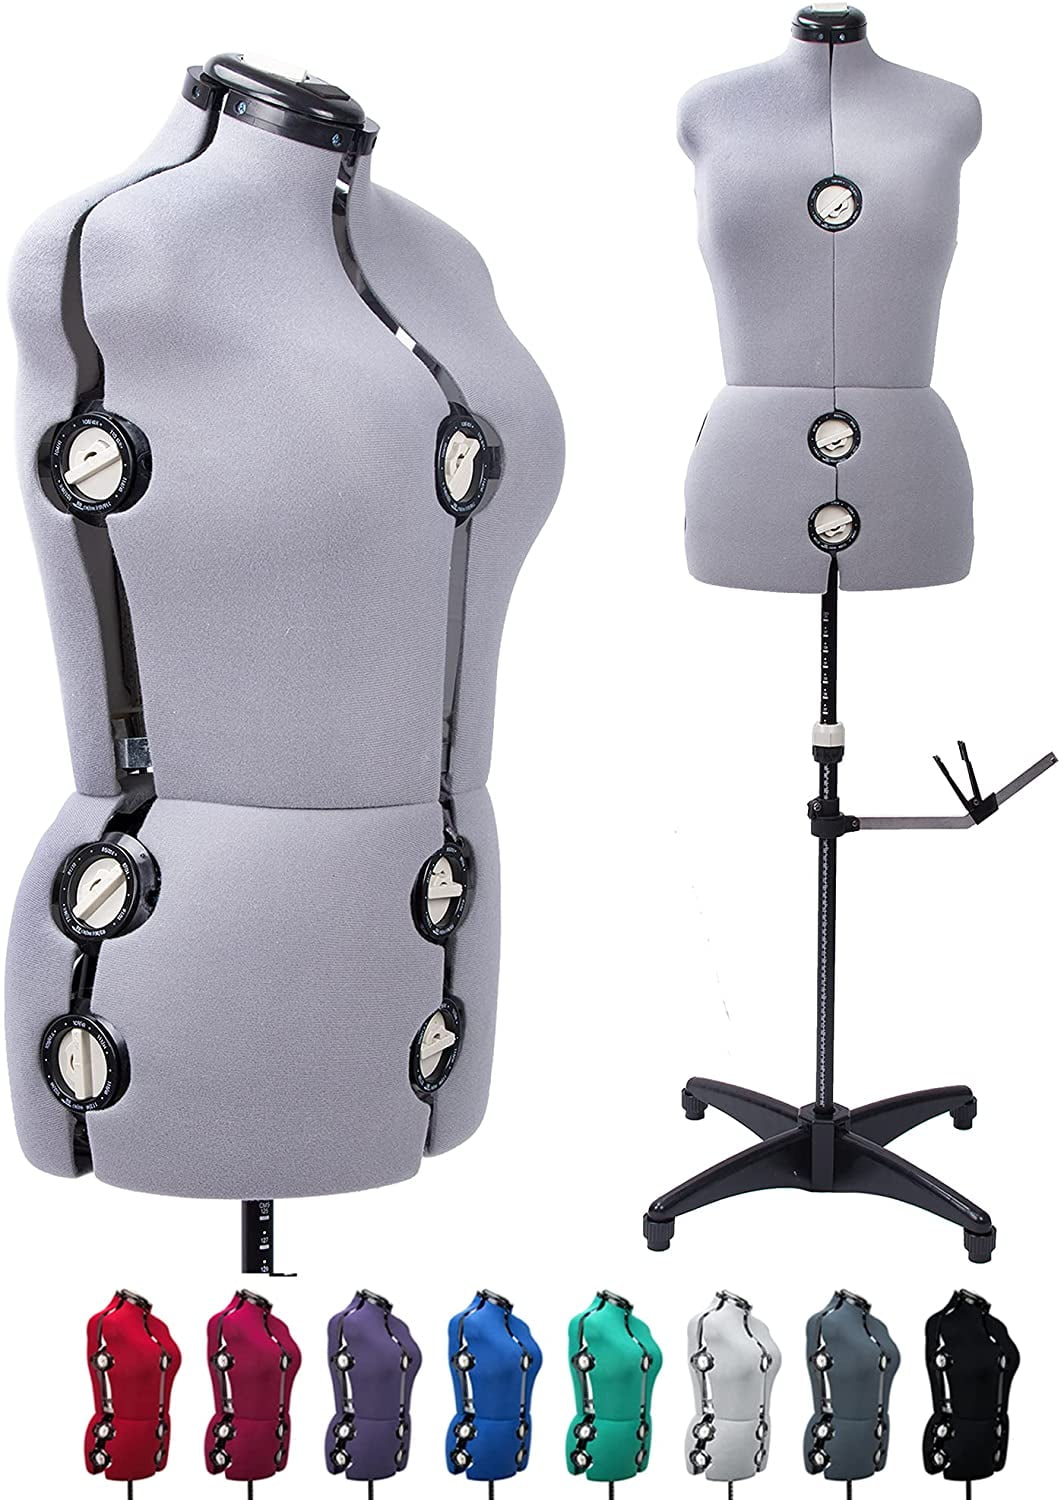 Adjustable Sewing Dress Form Female Mannequin Torso Stand Small Size #JF-FH-2 